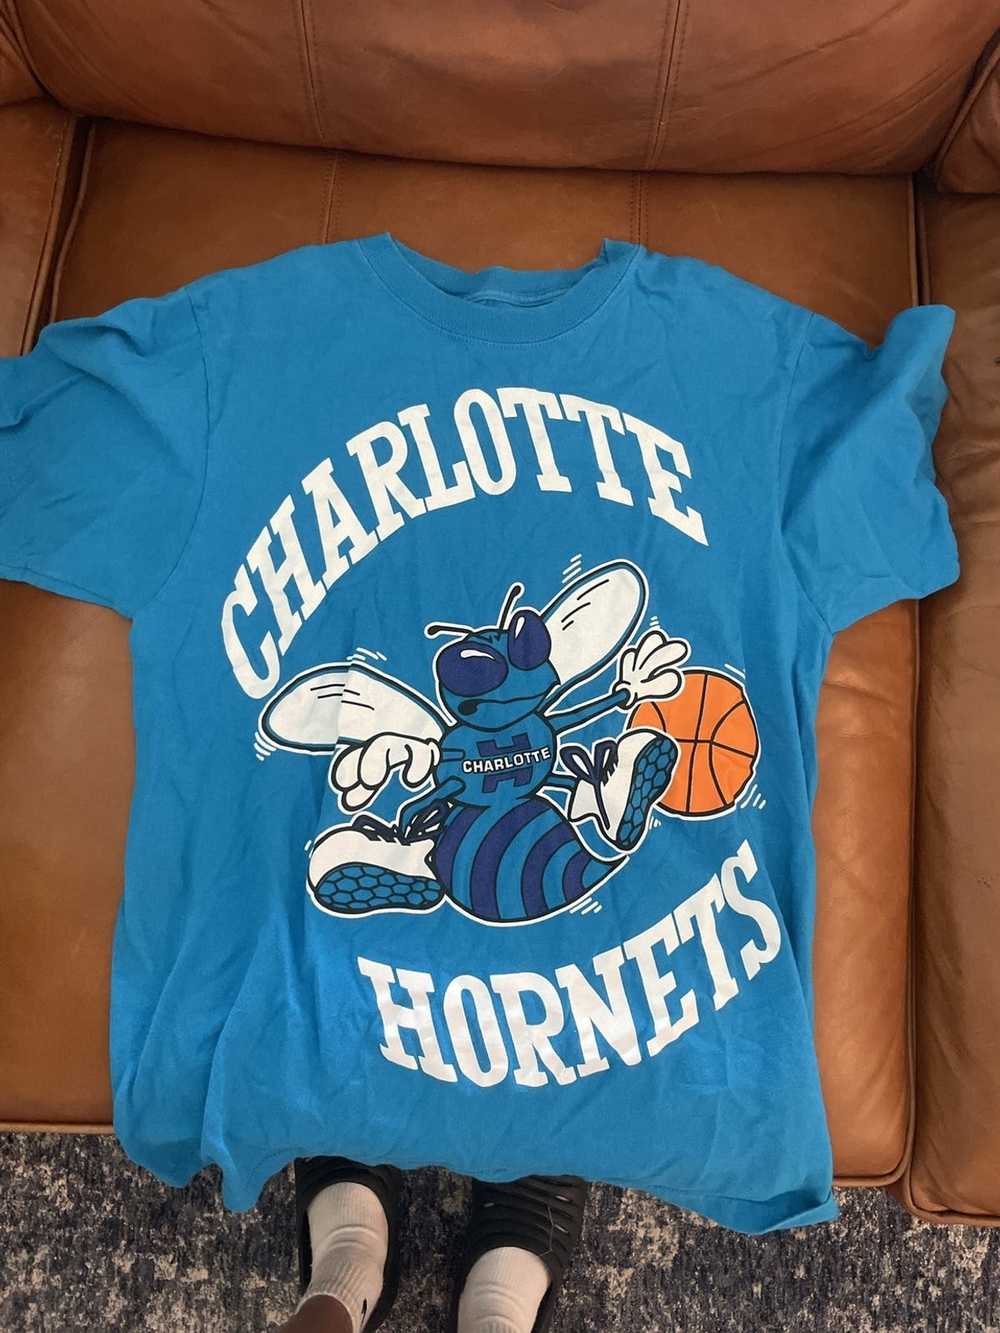 Charlotte Hornets Somos Los Blazers Noches Ene-Be-A shirt, hoodie, sweater,  long sleeve and tank top